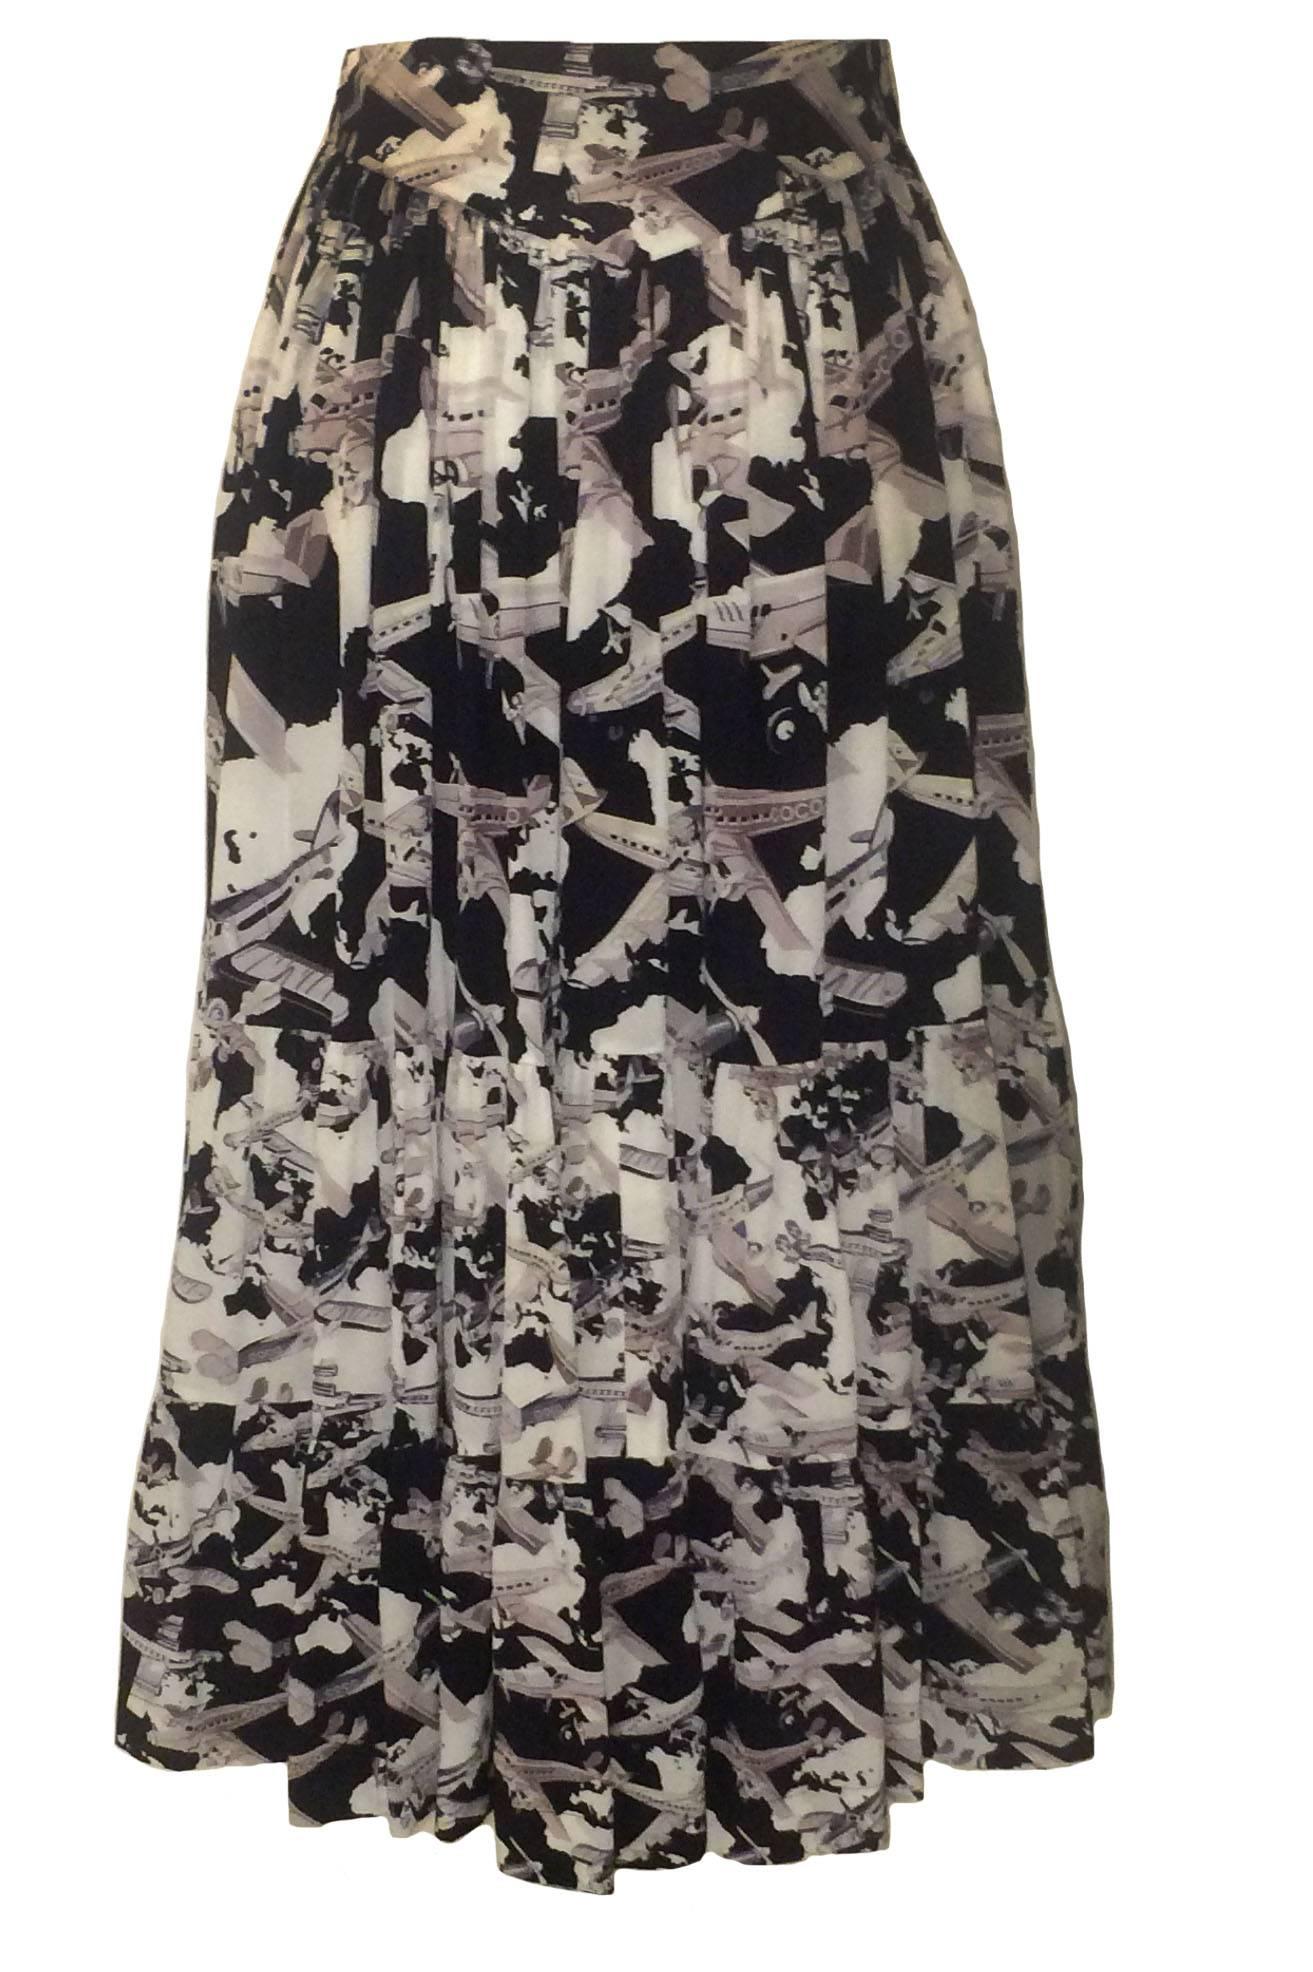 Chanel airplane print skirt from the Spring 2006 collection. Black silk fabric features white clouds and tan and grey planes with 'Coco' 'Chanel Air' and 'CC' logos throughout. Invisible side zip and hook and eye.

100% silk.

Size (based on